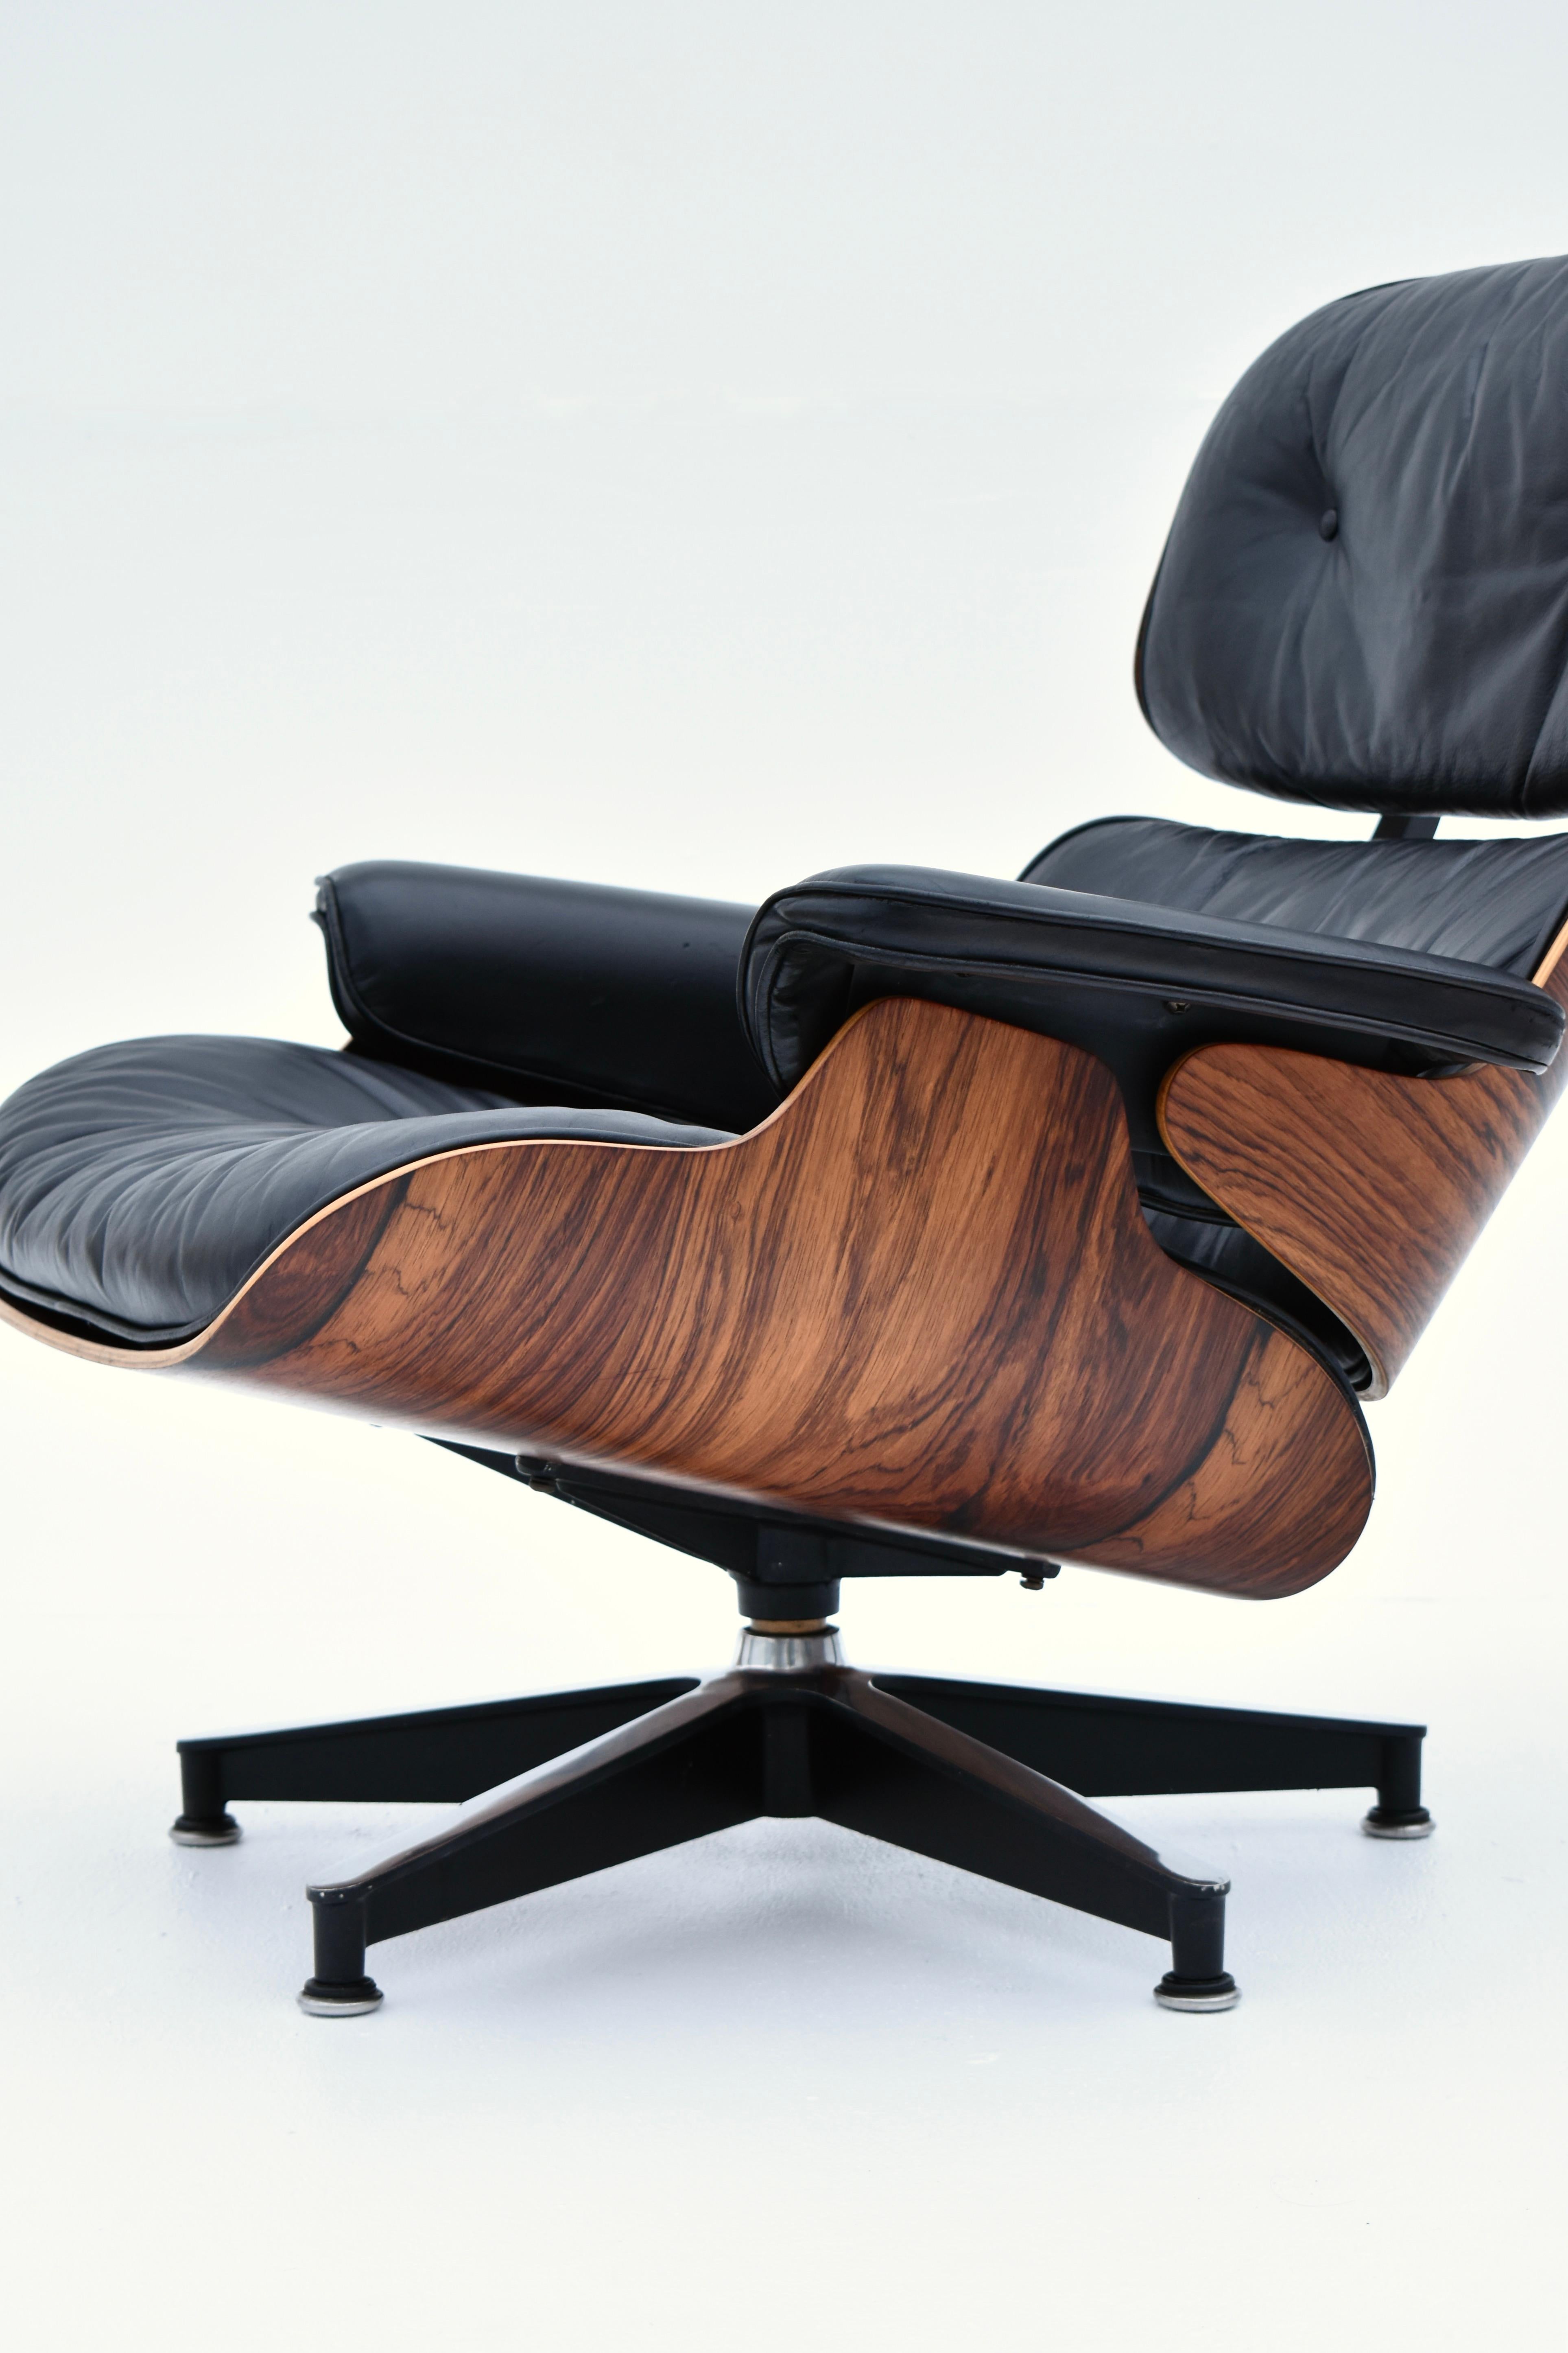 Mid-Century Modern Original 1960's Production Eames Lounge Chair For Herman Miller